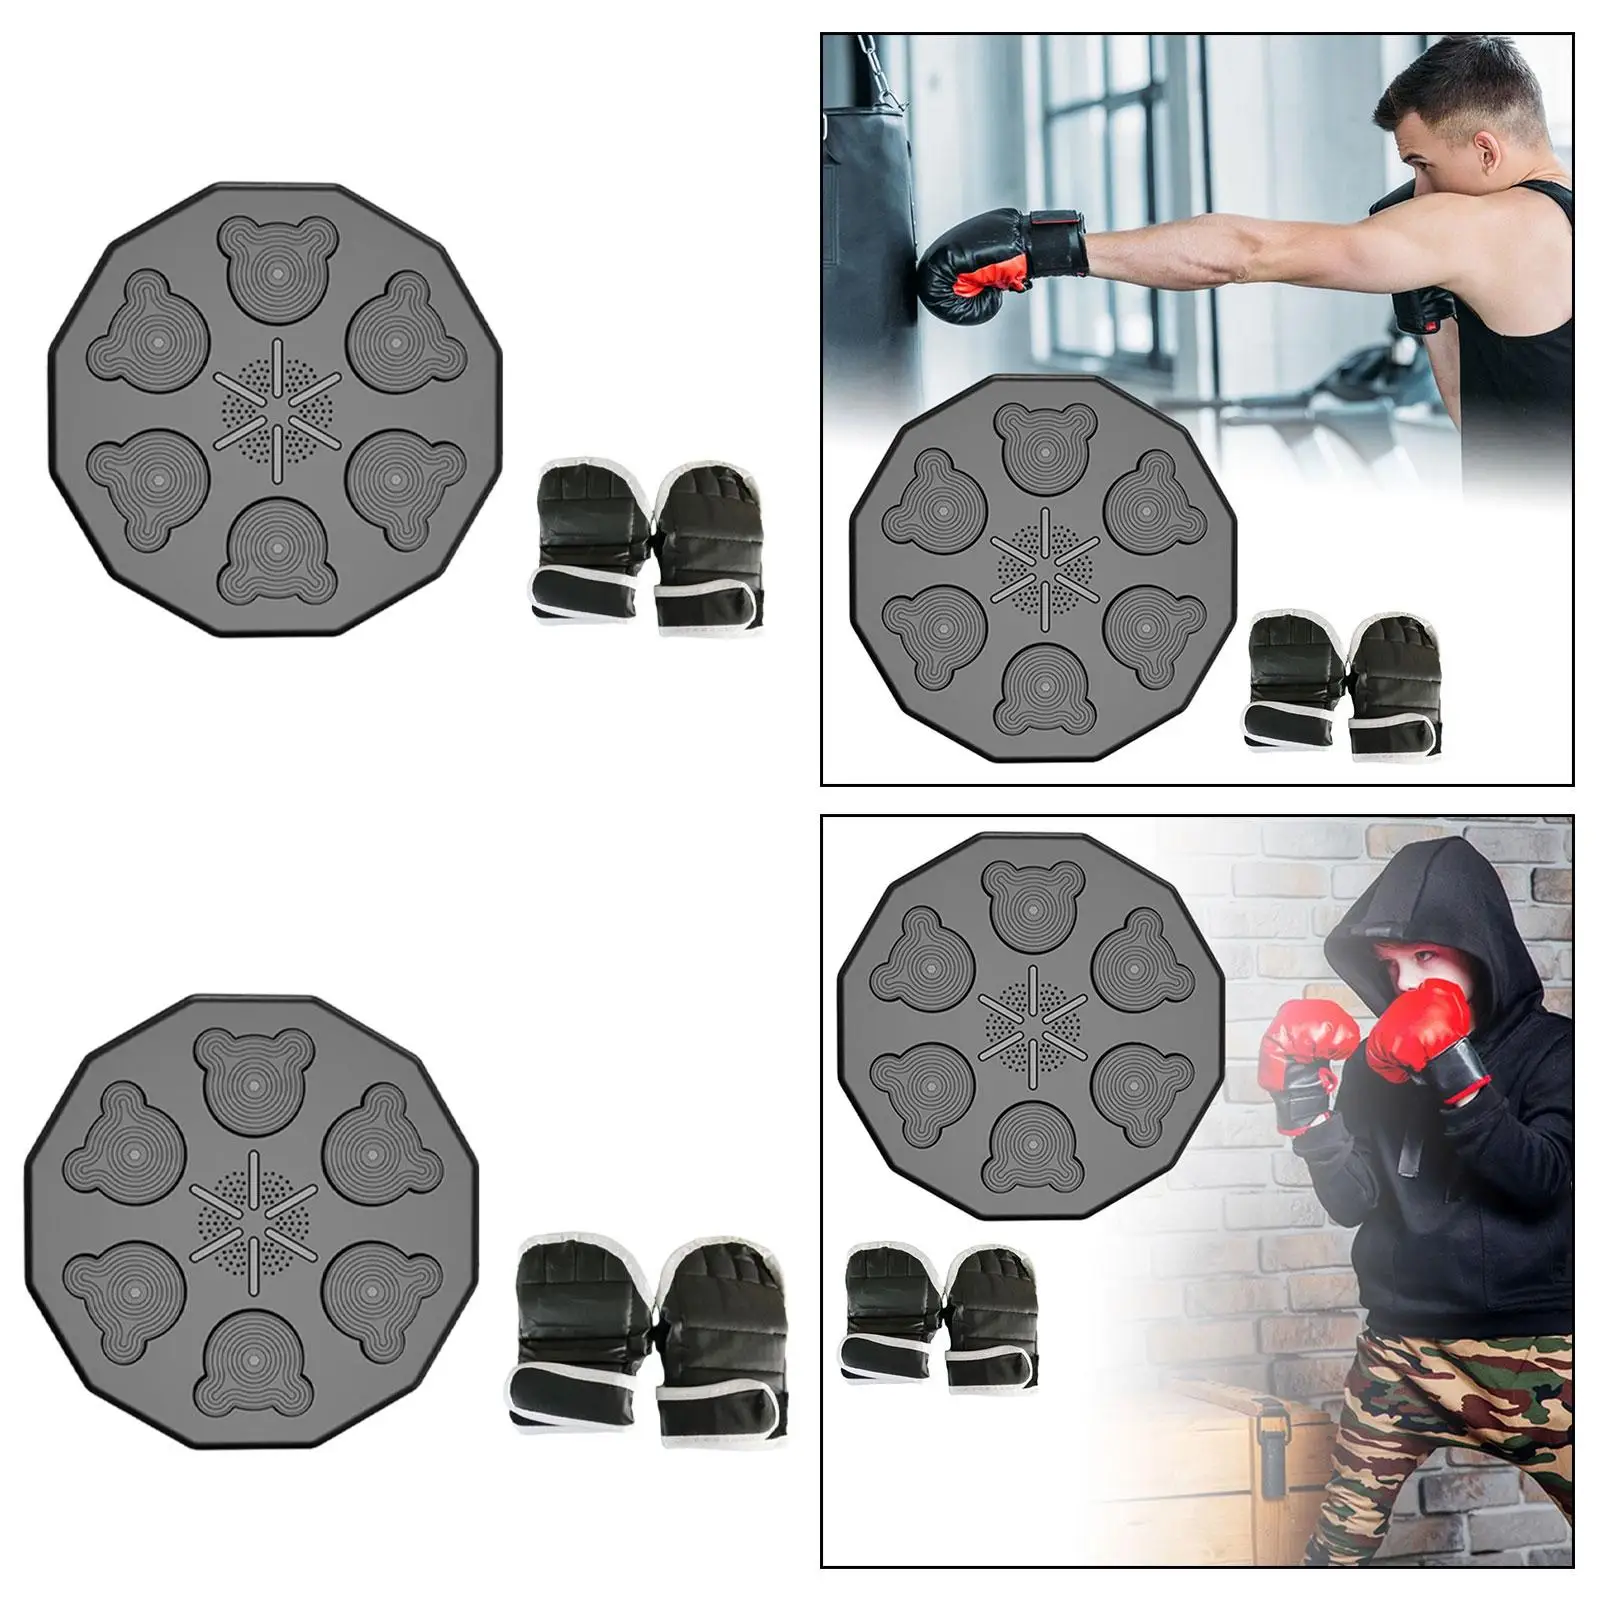 Music Boxing Machine Wall Mounted Music Boxing Pads Reaction Training Target Boxing Trainer Wall Target for Sanda Indoor Sports